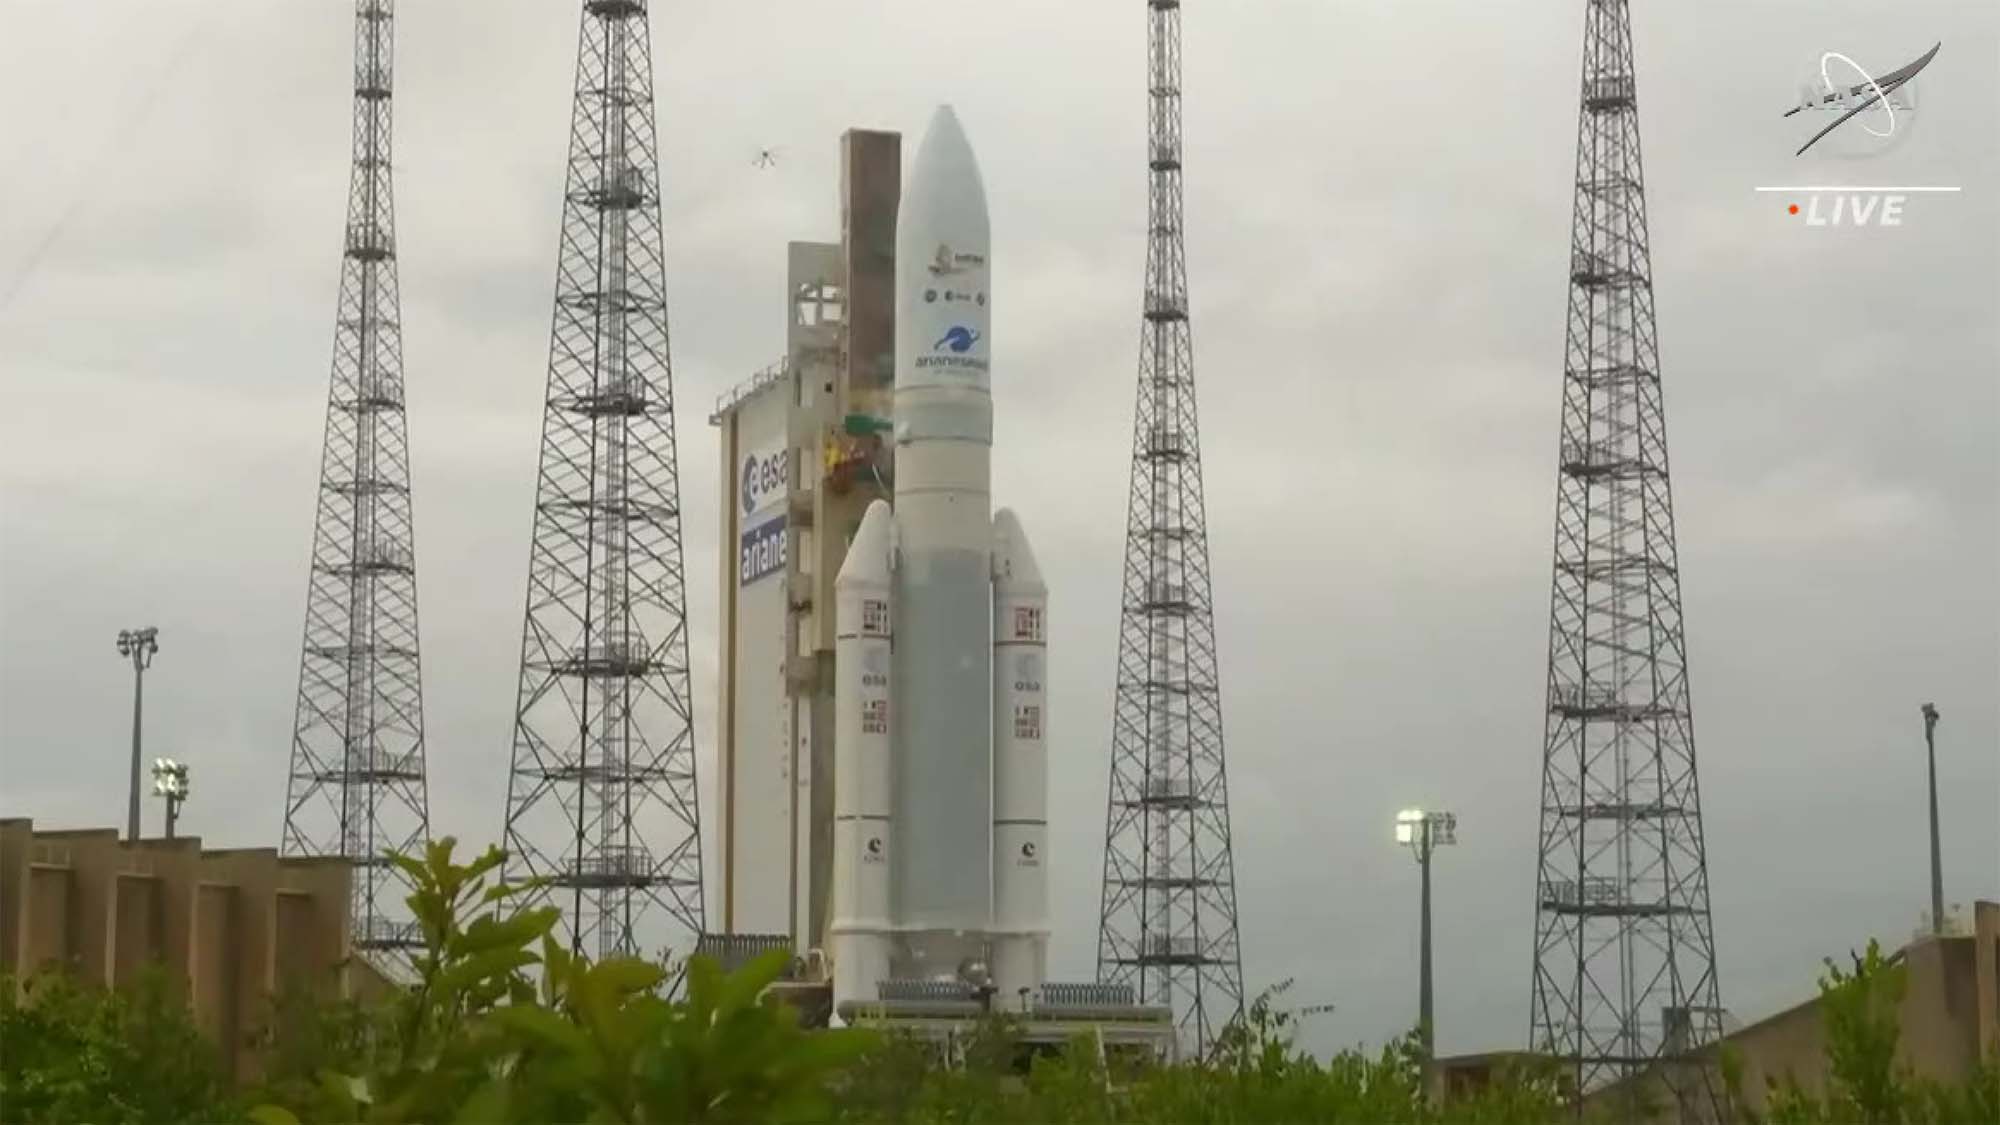 The Ariane 5 rocket on the launchpad in French Guiana